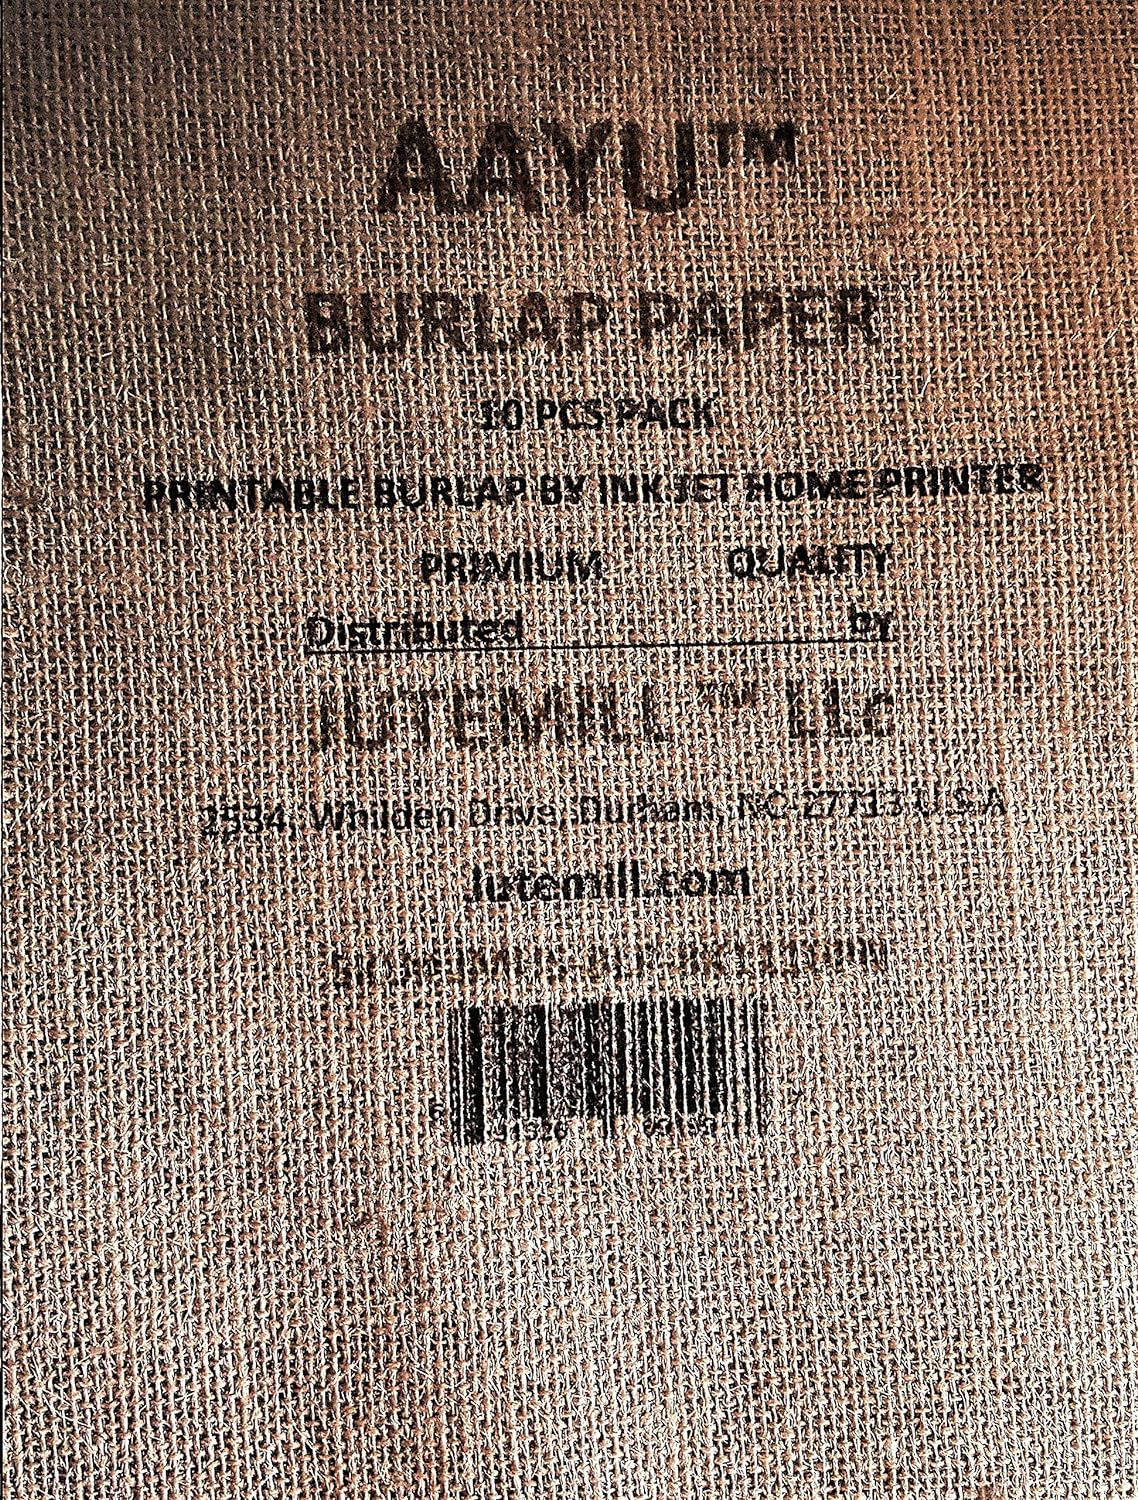 AAYU A4 Bulk Printable Jute Burlap Paper | Laminated, Plain, Made from Jute fibers | About 8.5 x 11.5 Inches | Pack of 10 + 1 Extra | Print Anything with Ink Jet Printer